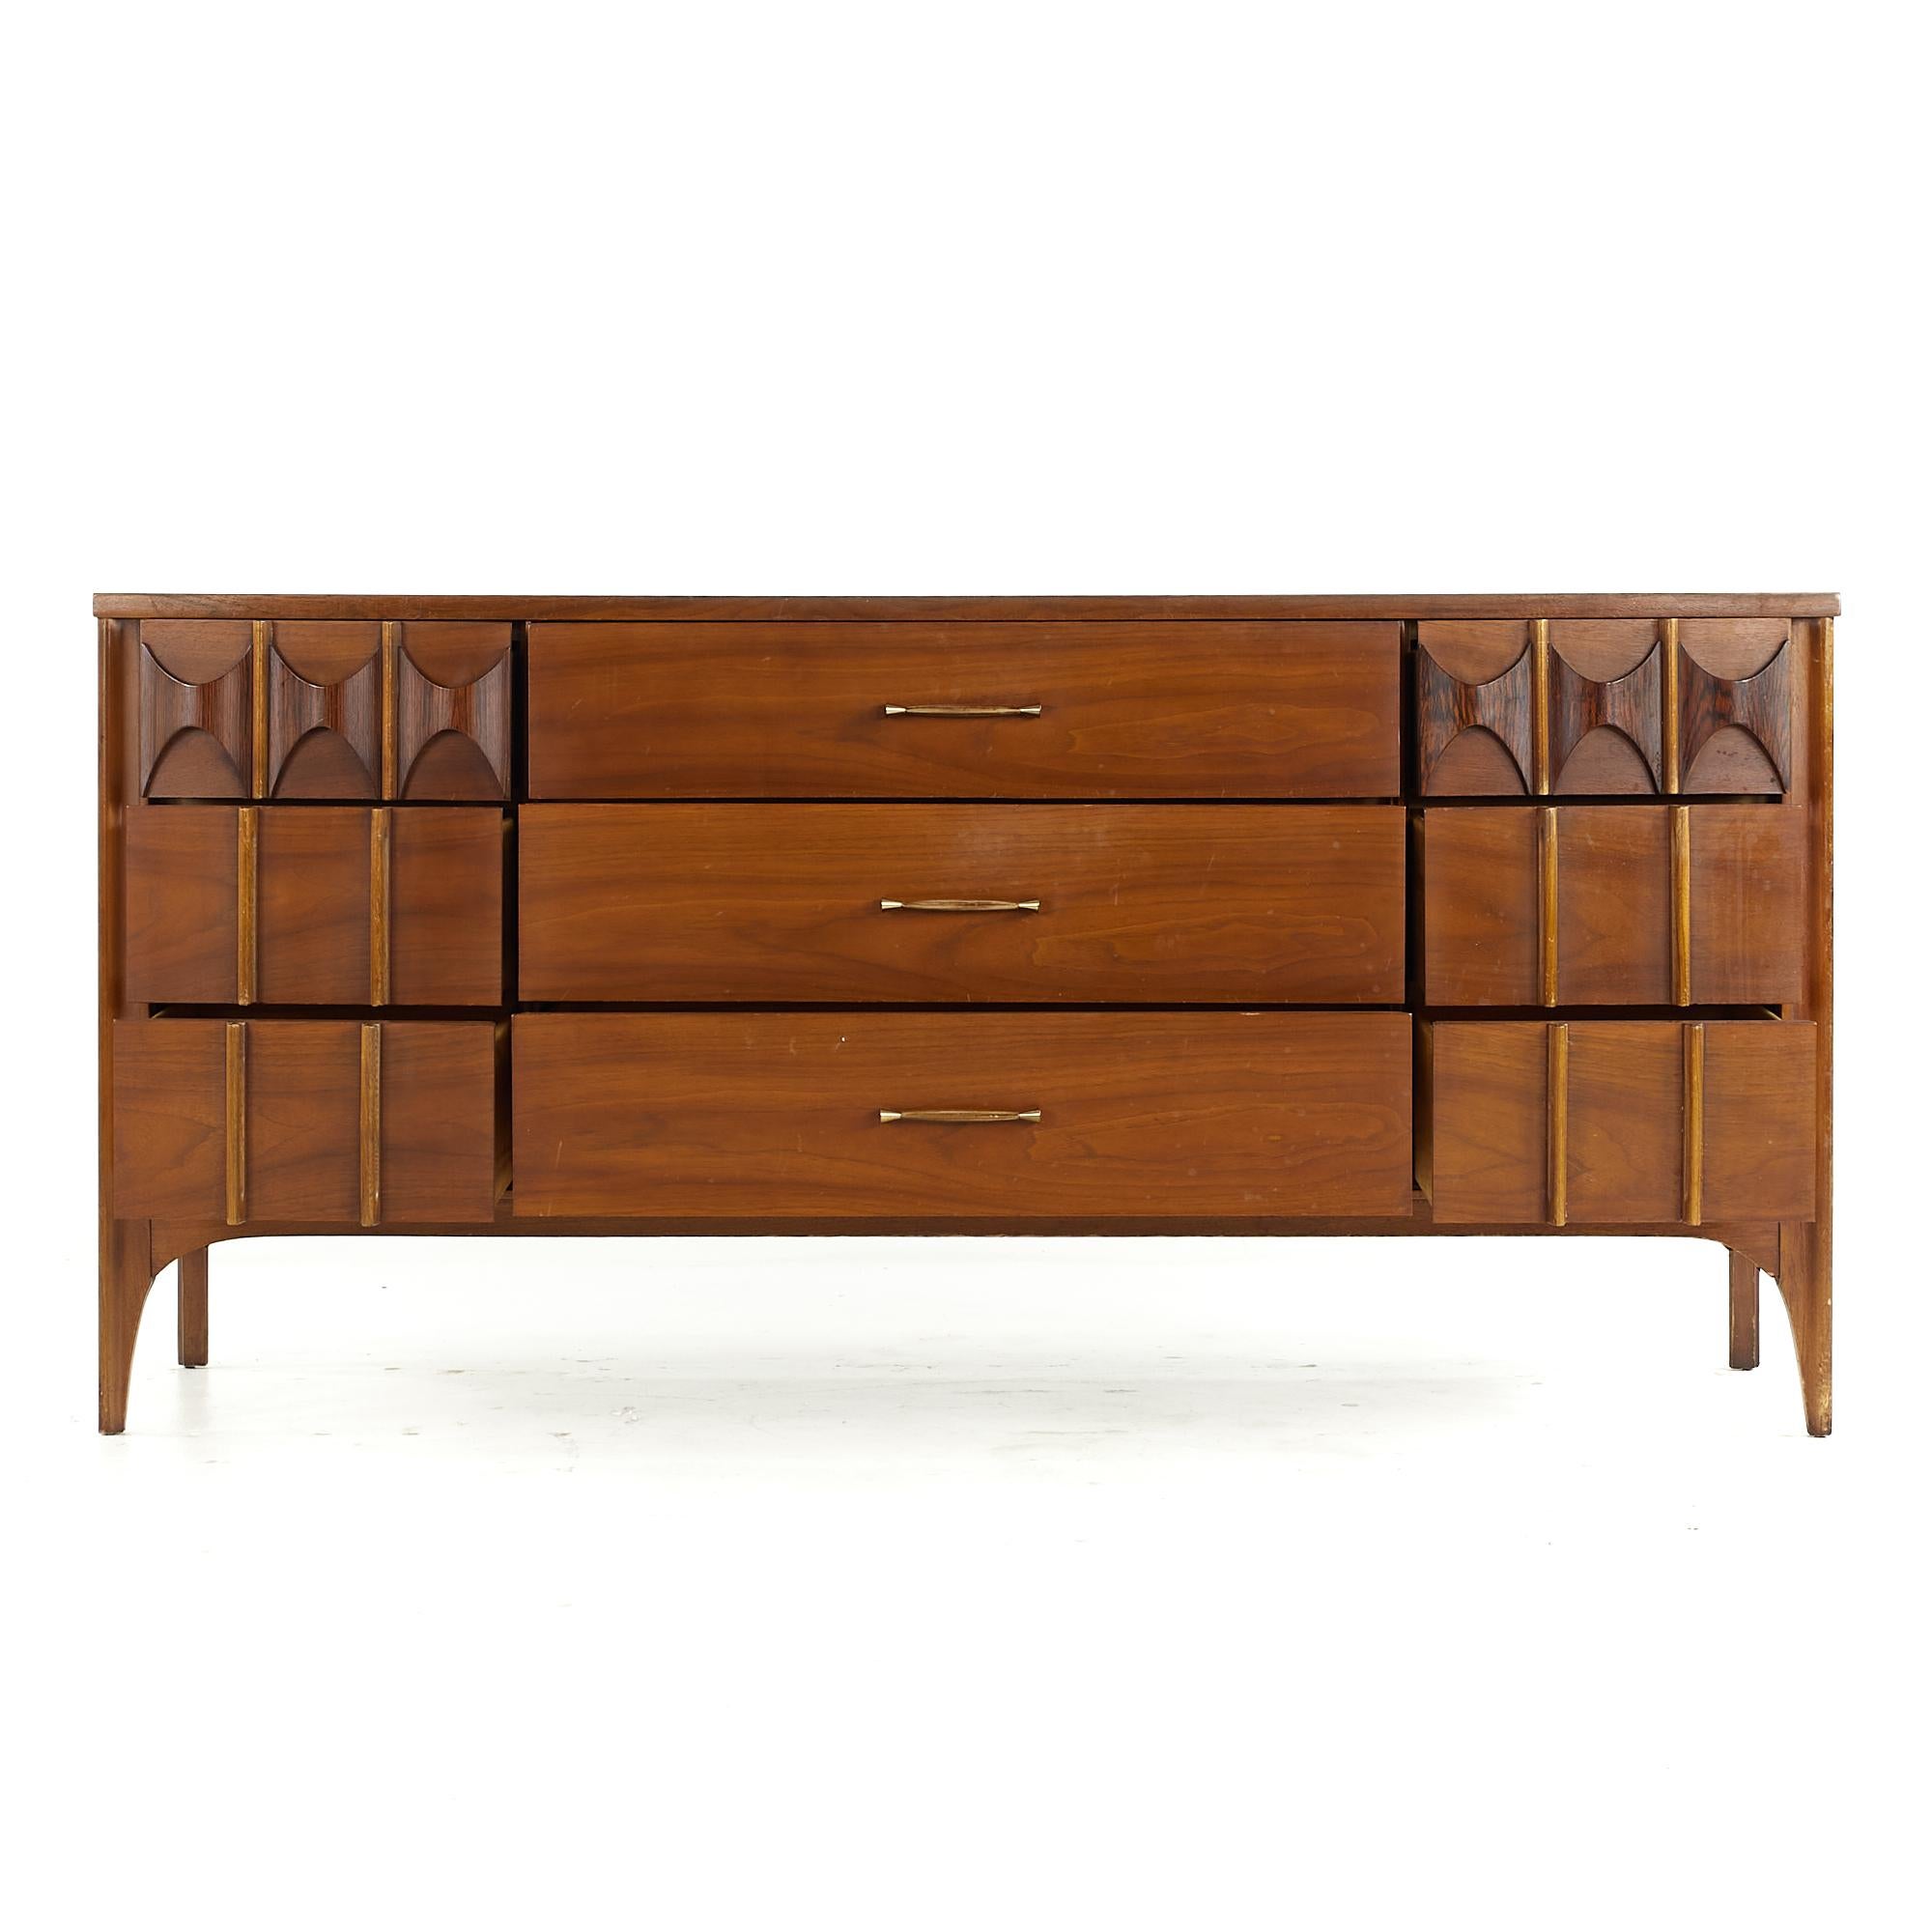 Late 20th Century Kent Coffey Perspecta Midcentury Walnut and Rosewood 9 Drawer Lowboy Dresser For Sale